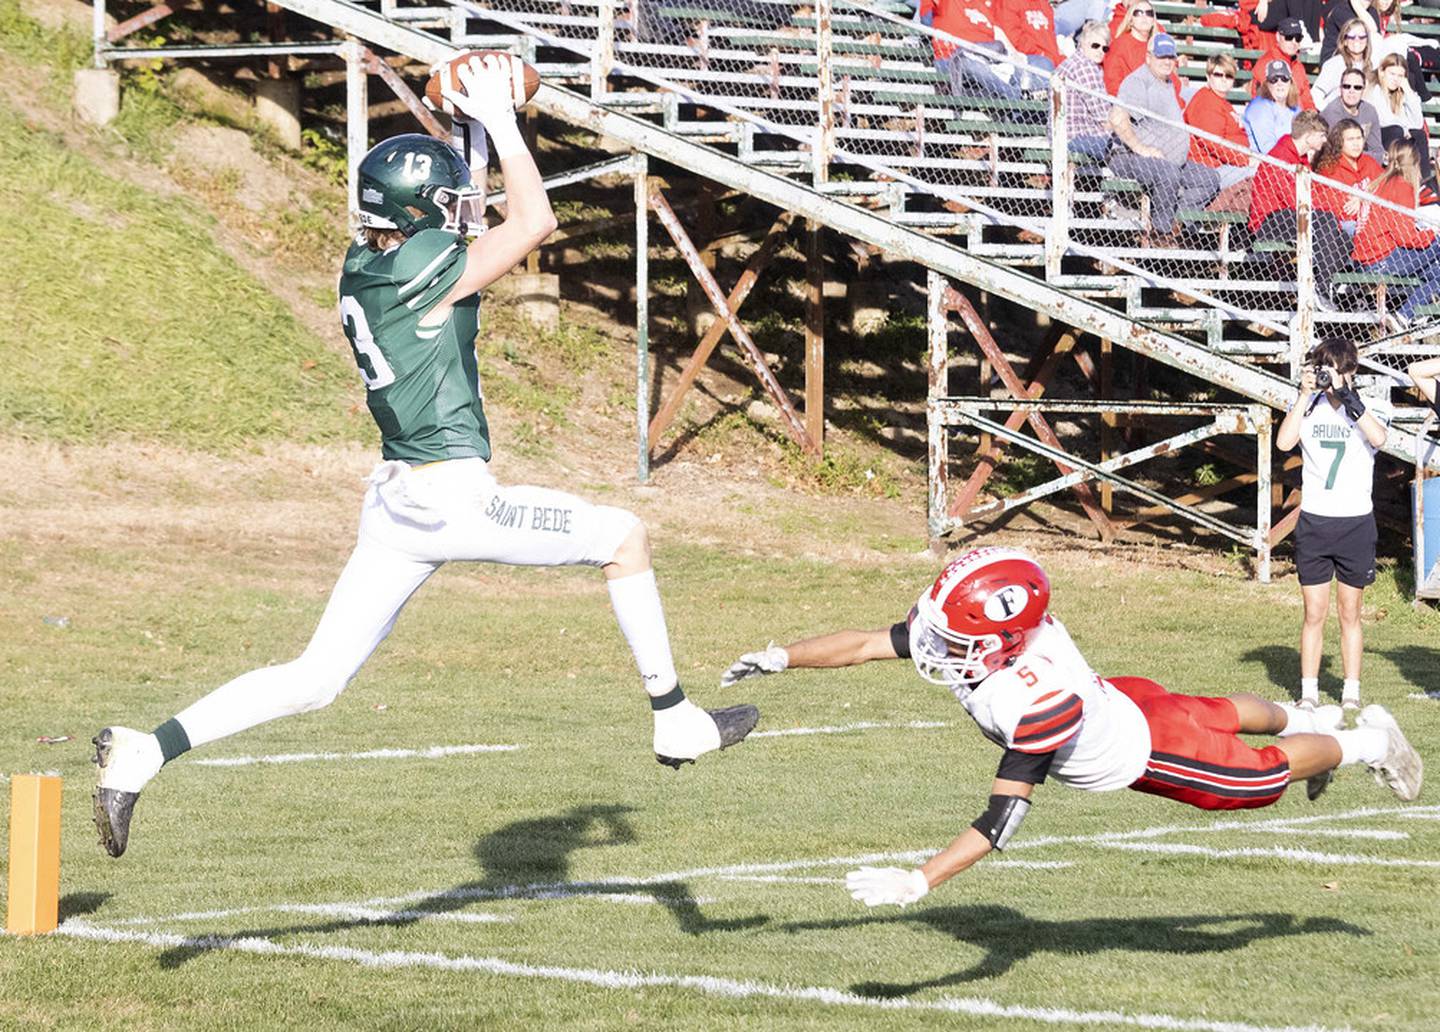 St. Bede's Ben Wallace (13) makes a catch for a touchdown over Morrison's McKreon Crase (5) during the Class 1A first round playoff game on Saturday, Oct. 29, 2022 at the Academy in Peru.